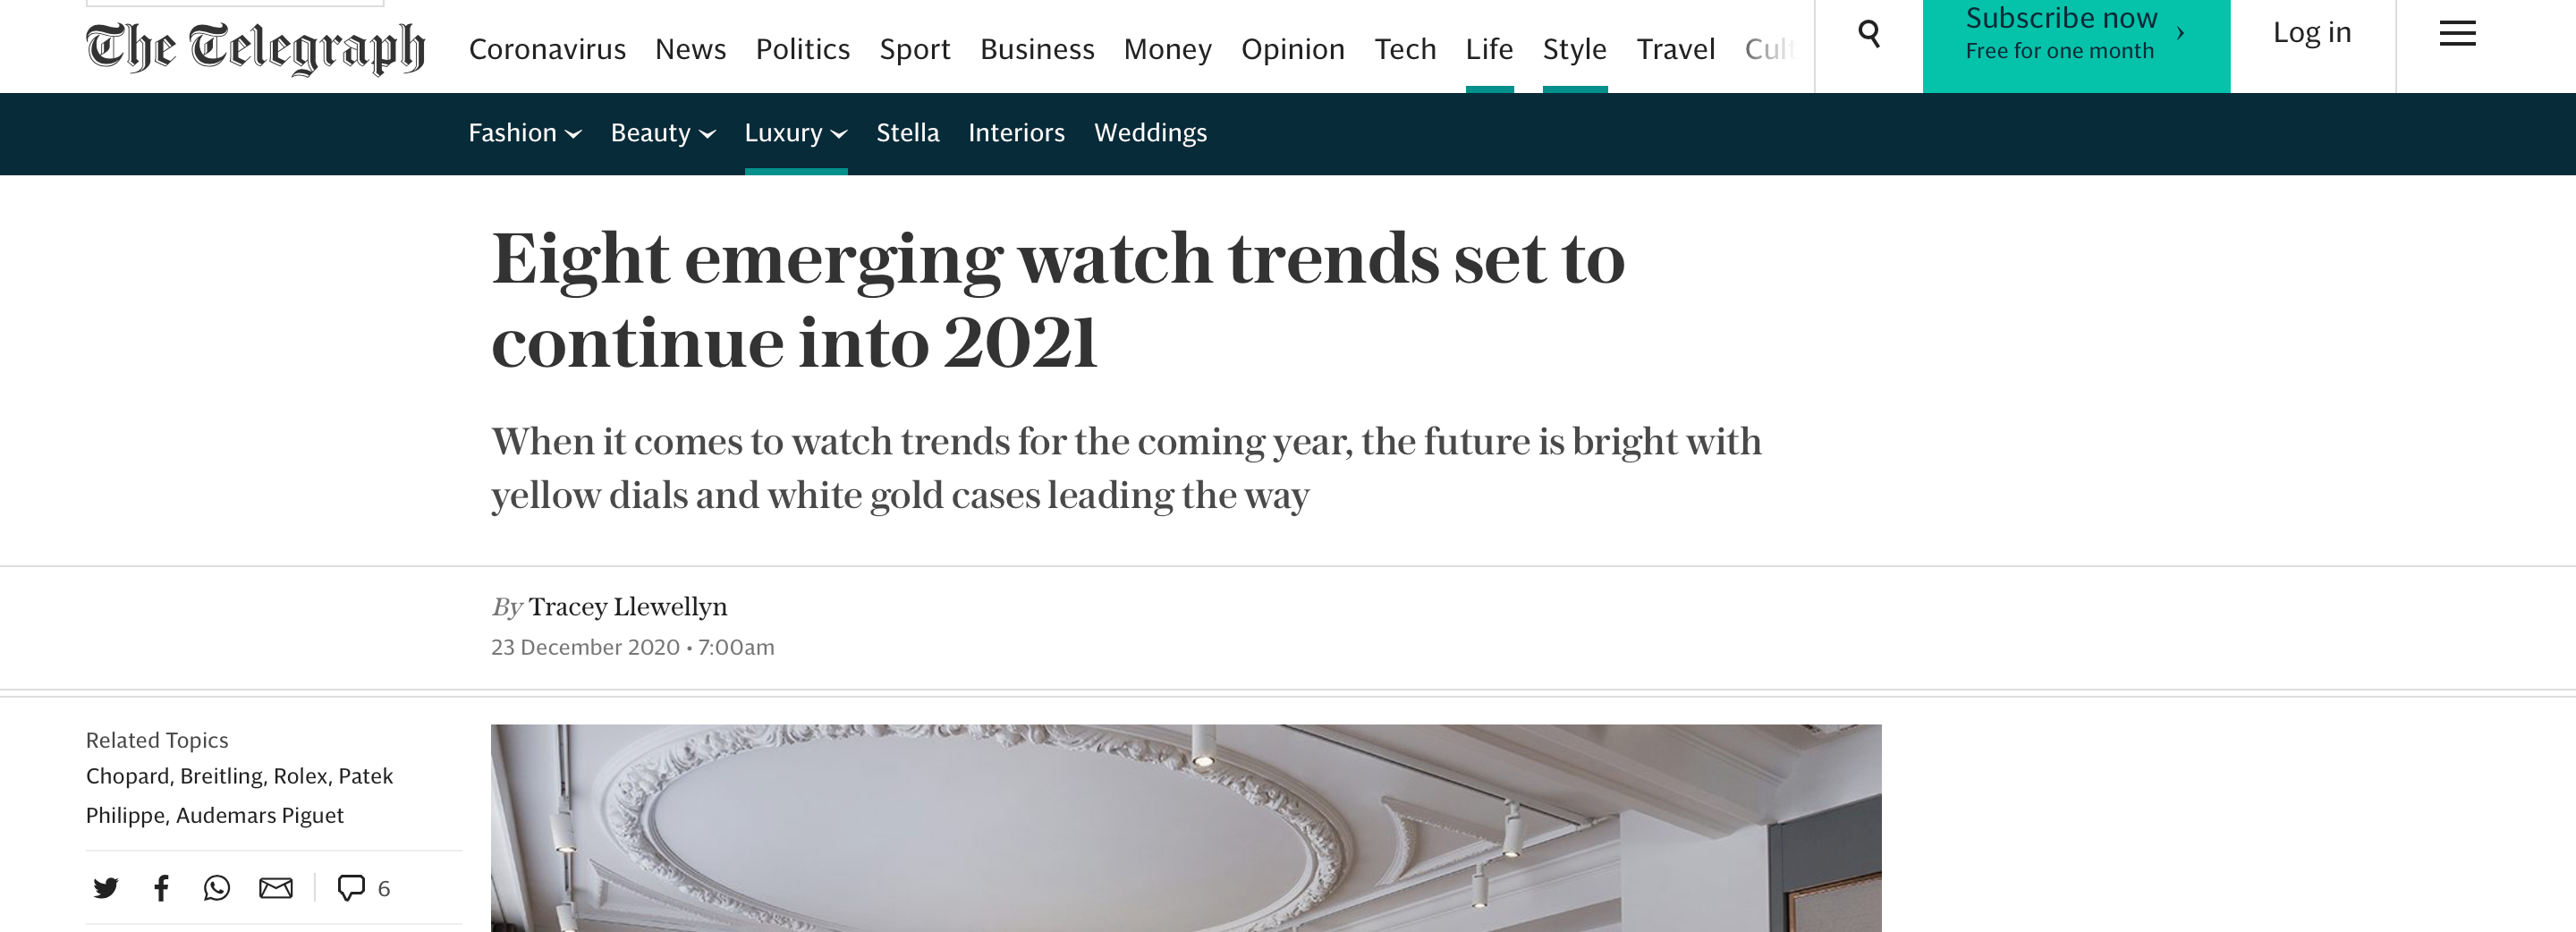 The Telegraph - Eight emerging watch trends in 2021